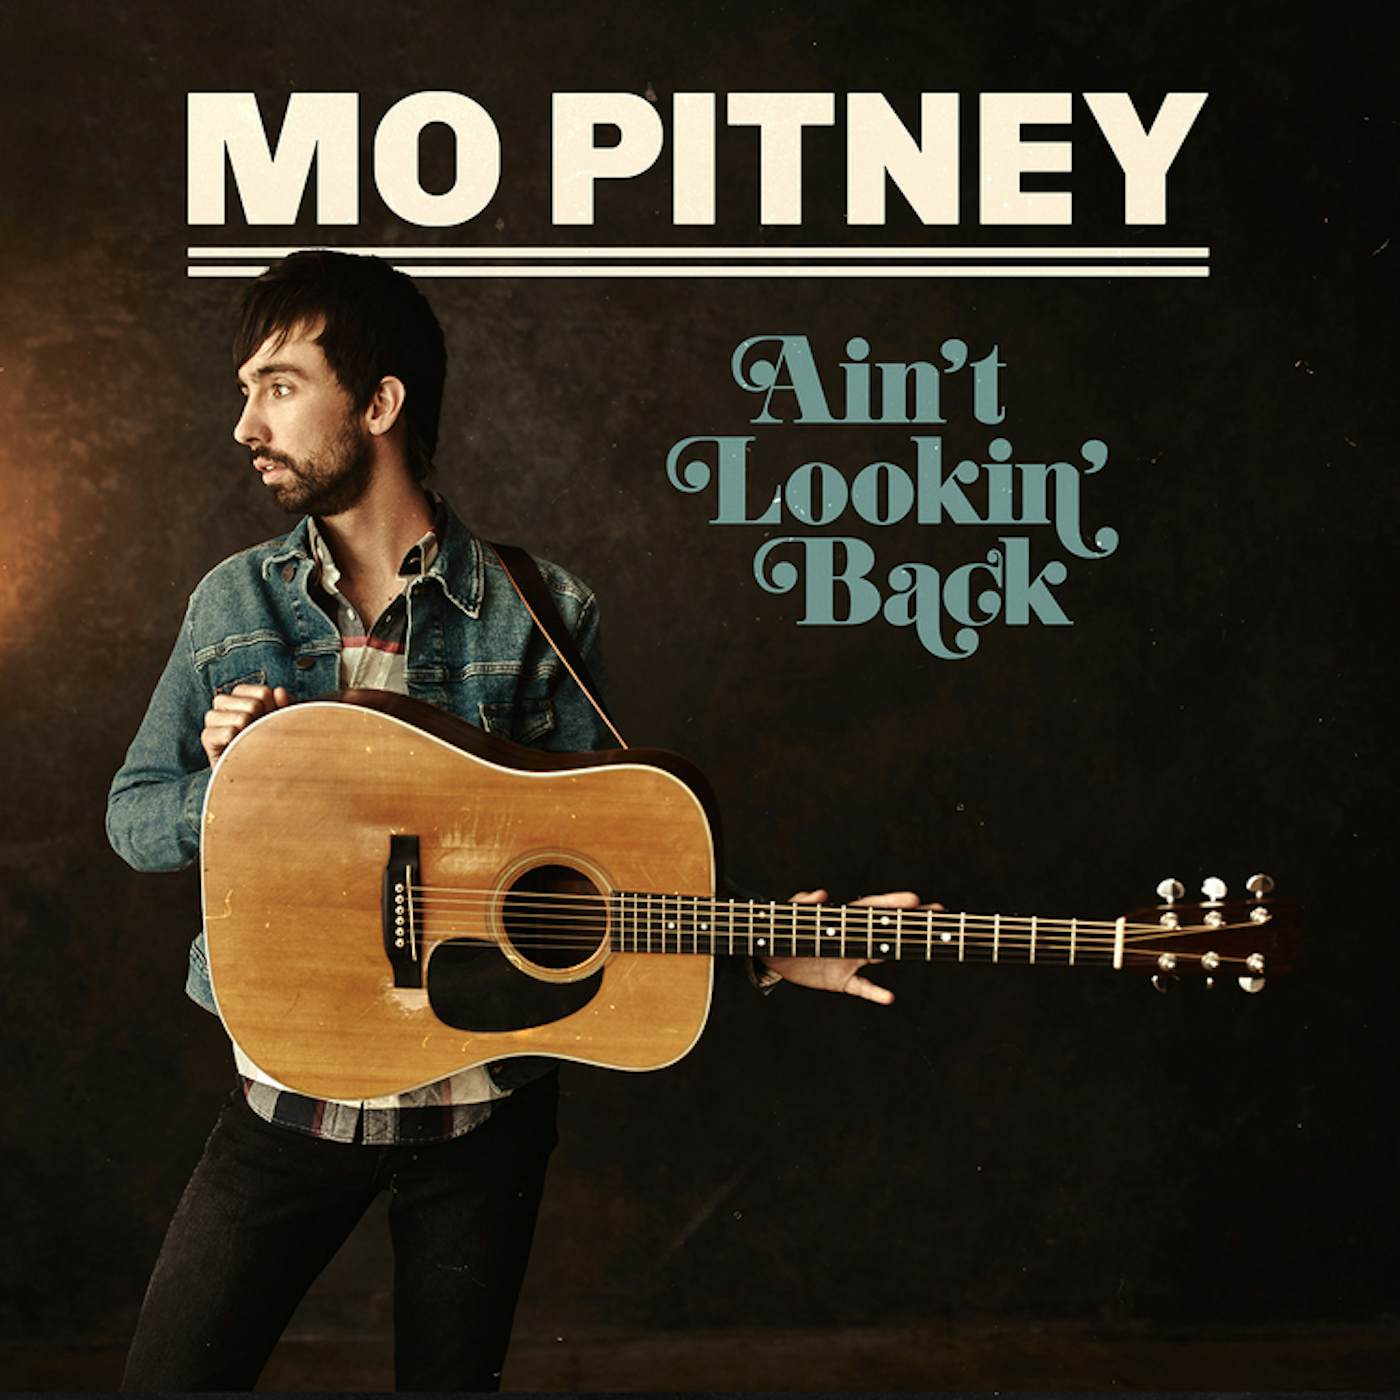 Mo Pitney AIN'T LOOKING BACK Vinyl Record